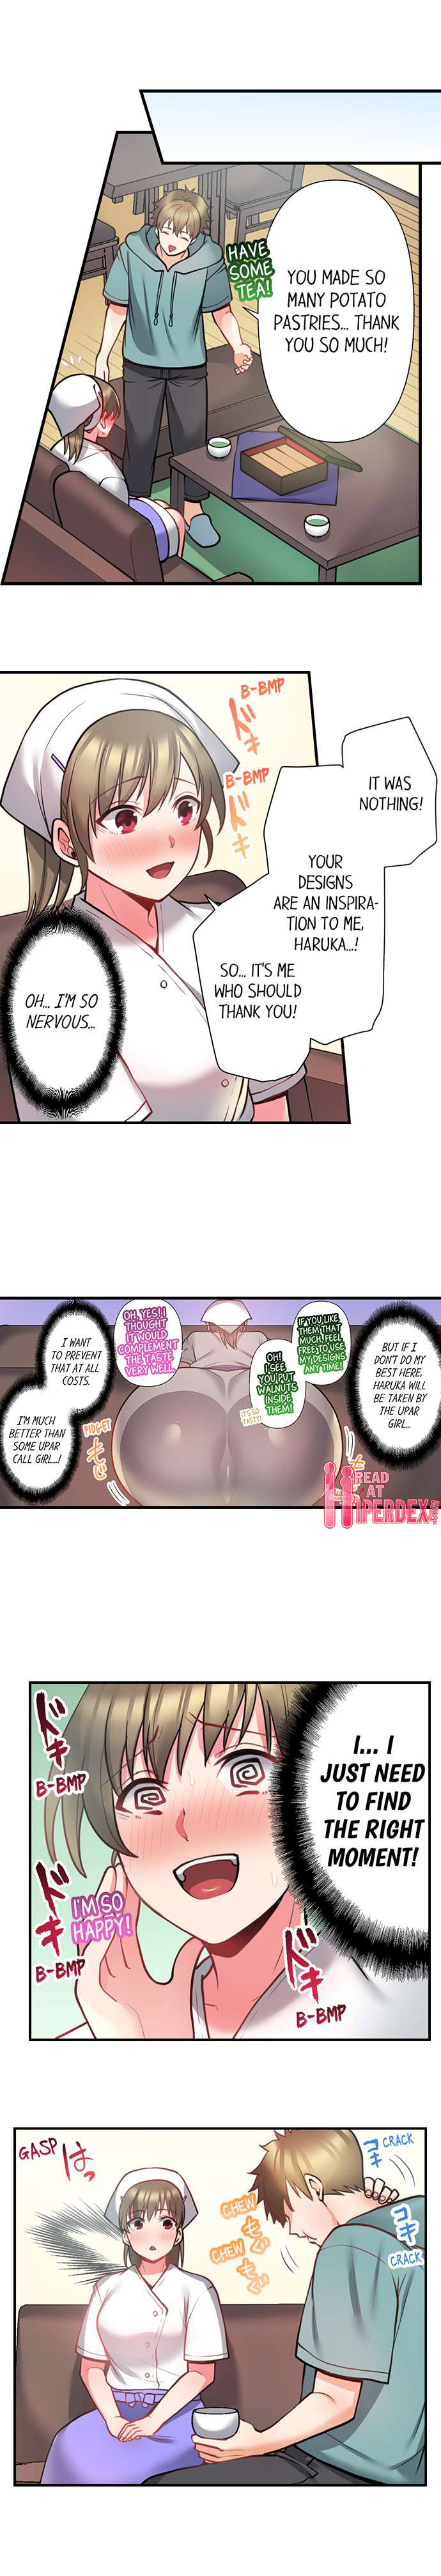 Bike Delivery Girl, Cumming To Your Door! - Chapter 22 Page 4